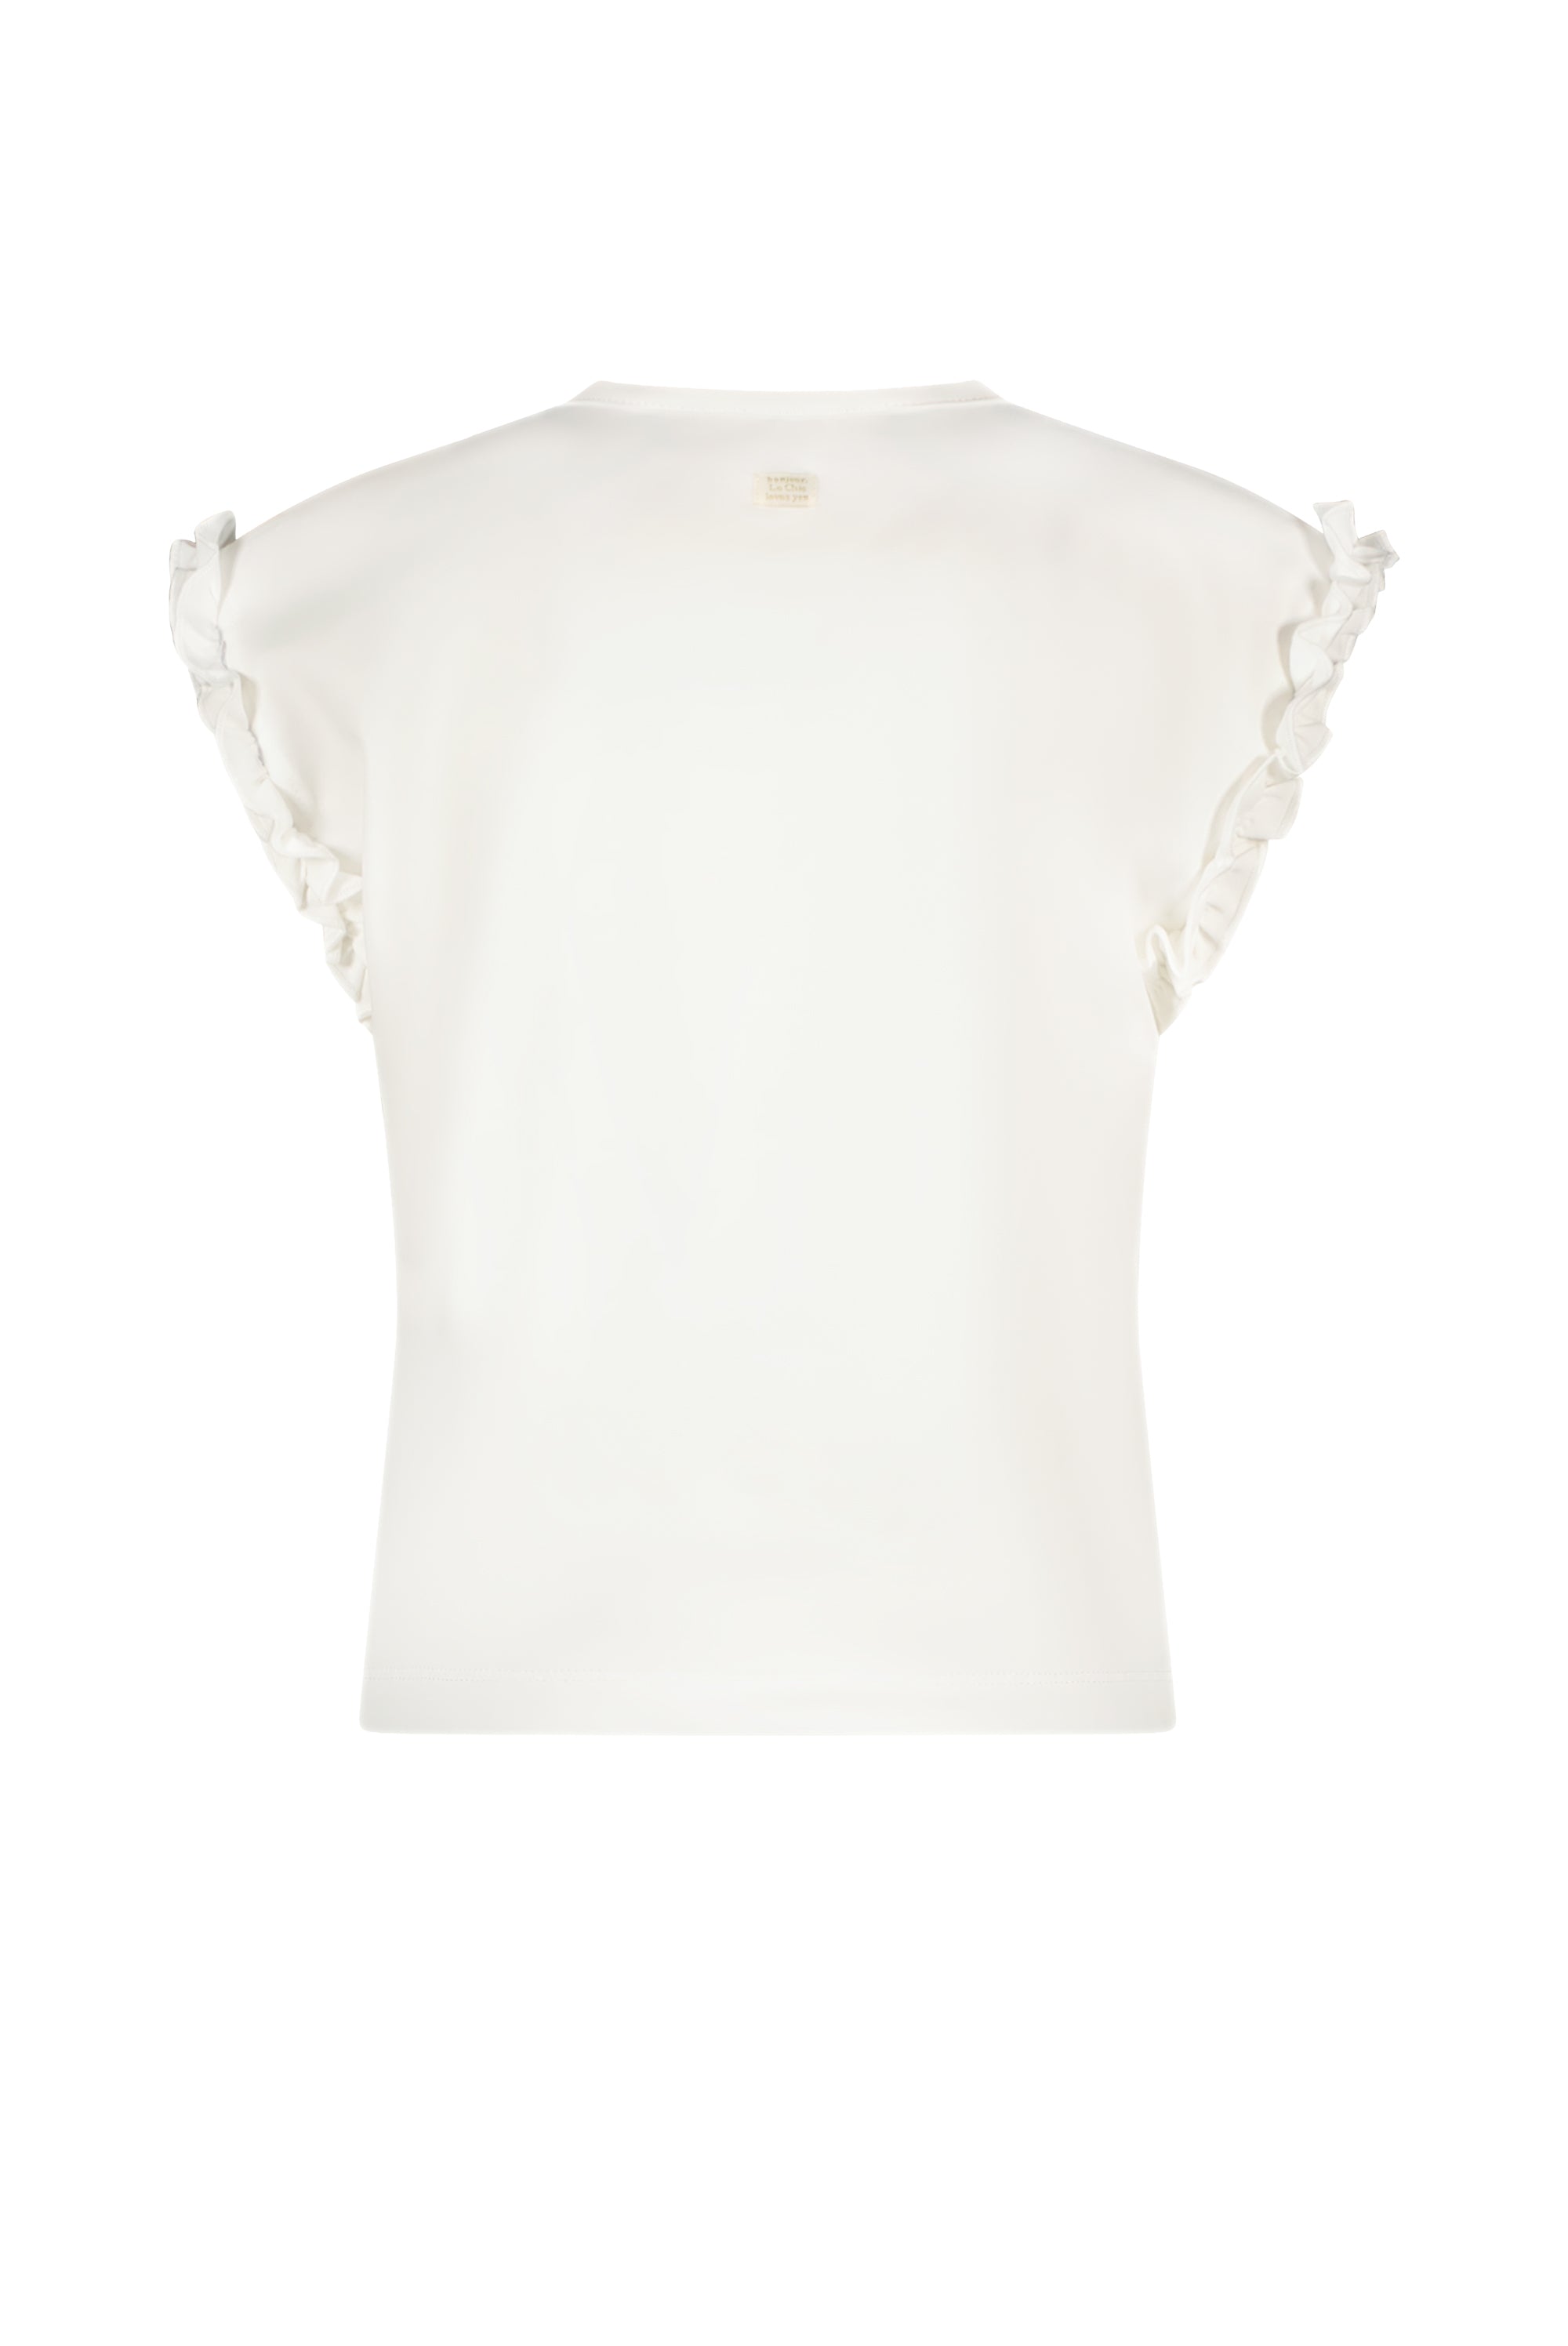 NOPALY flowers & lines T-shirt Off white